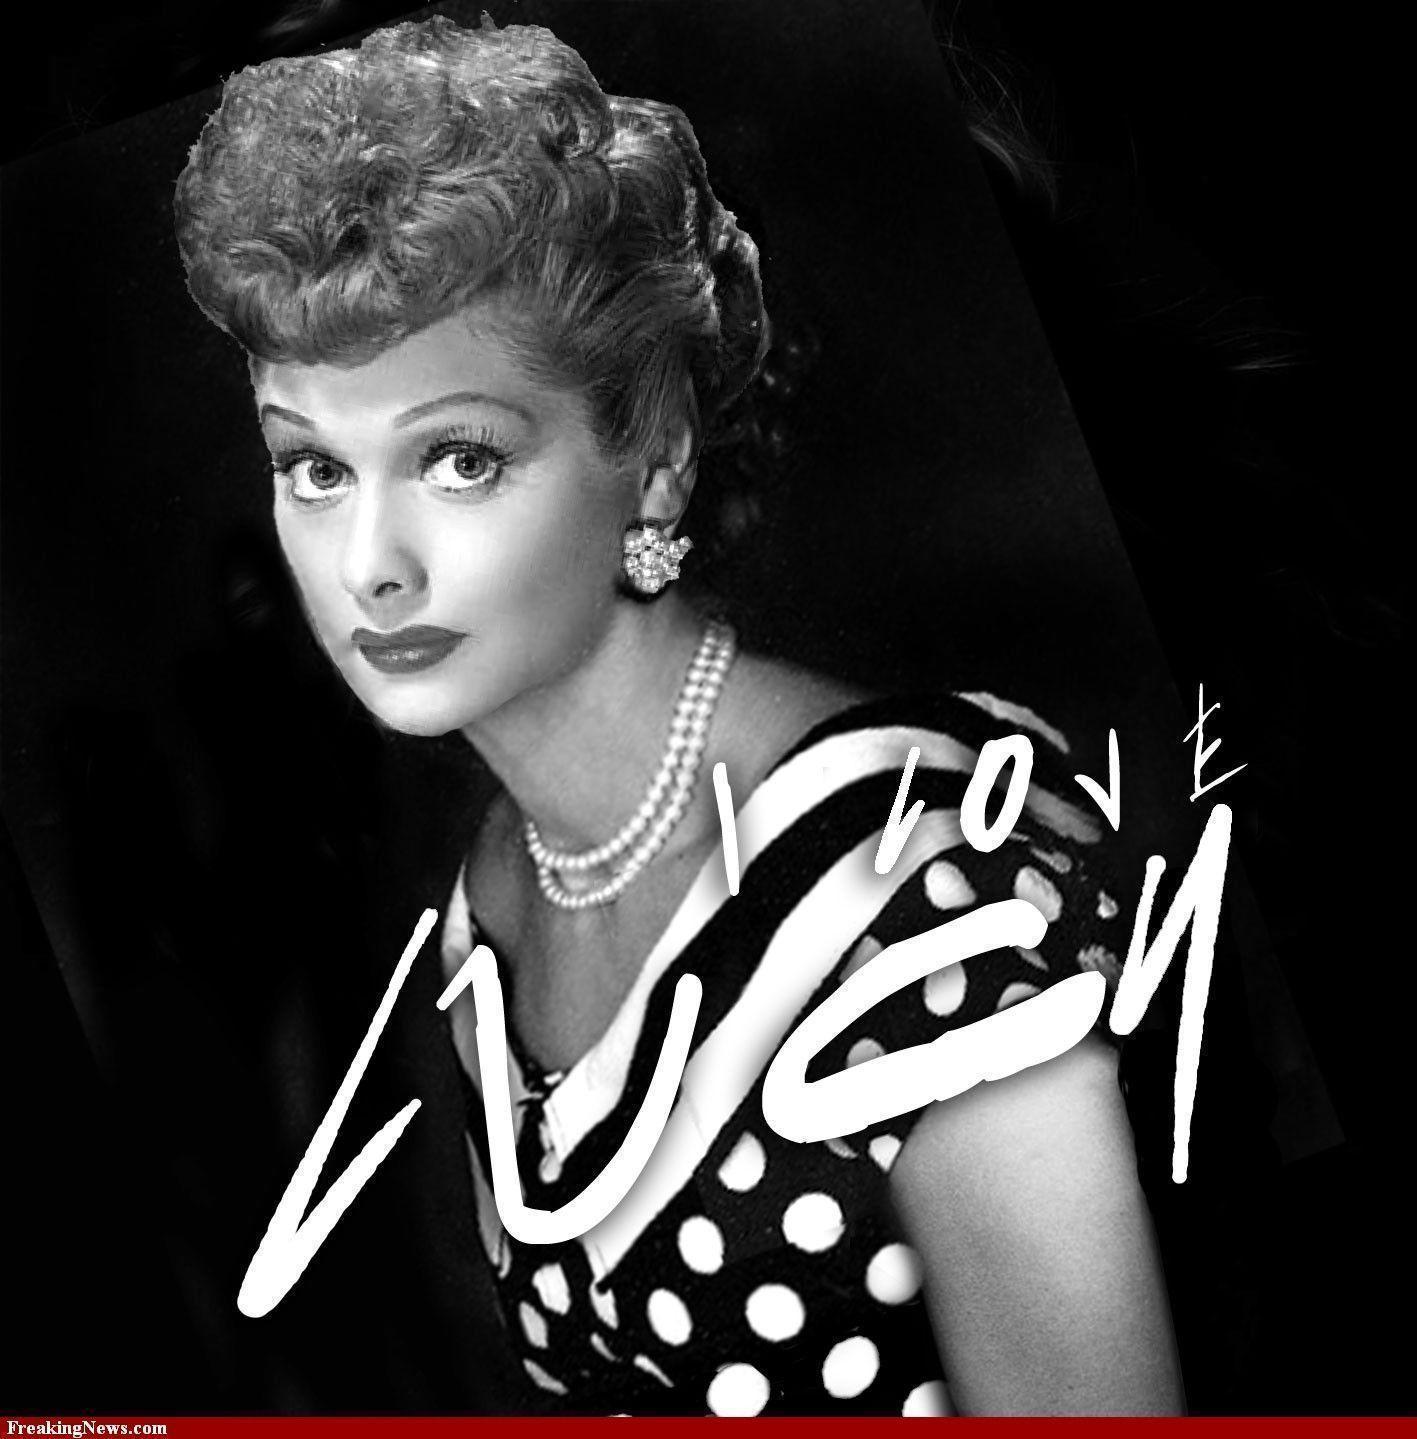 Wallpaper I Love Lucy Wallpapers